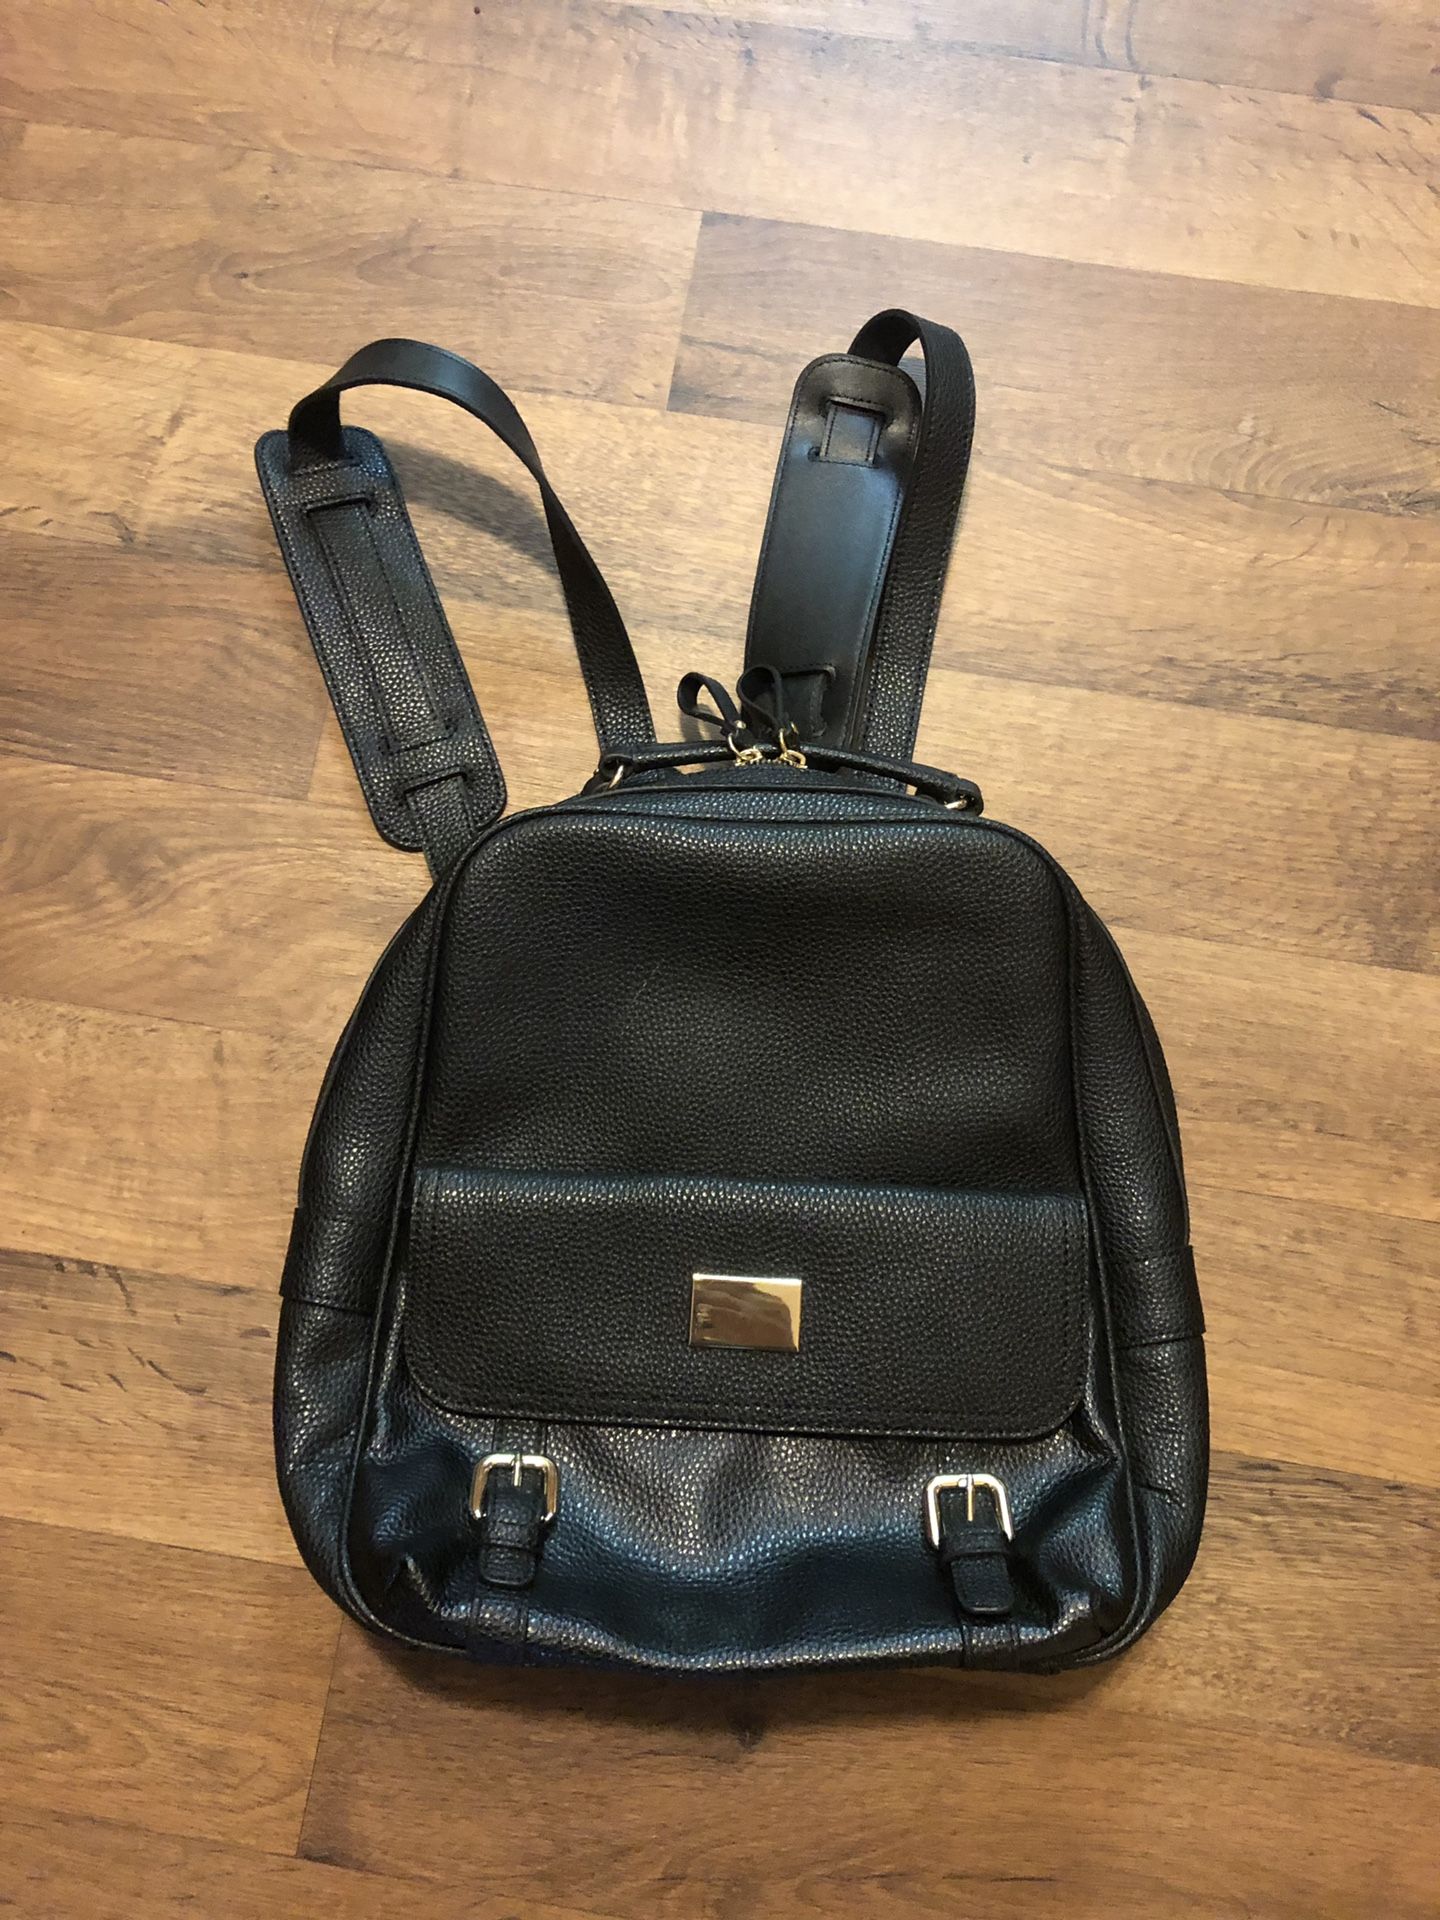 New black leather backpack $60